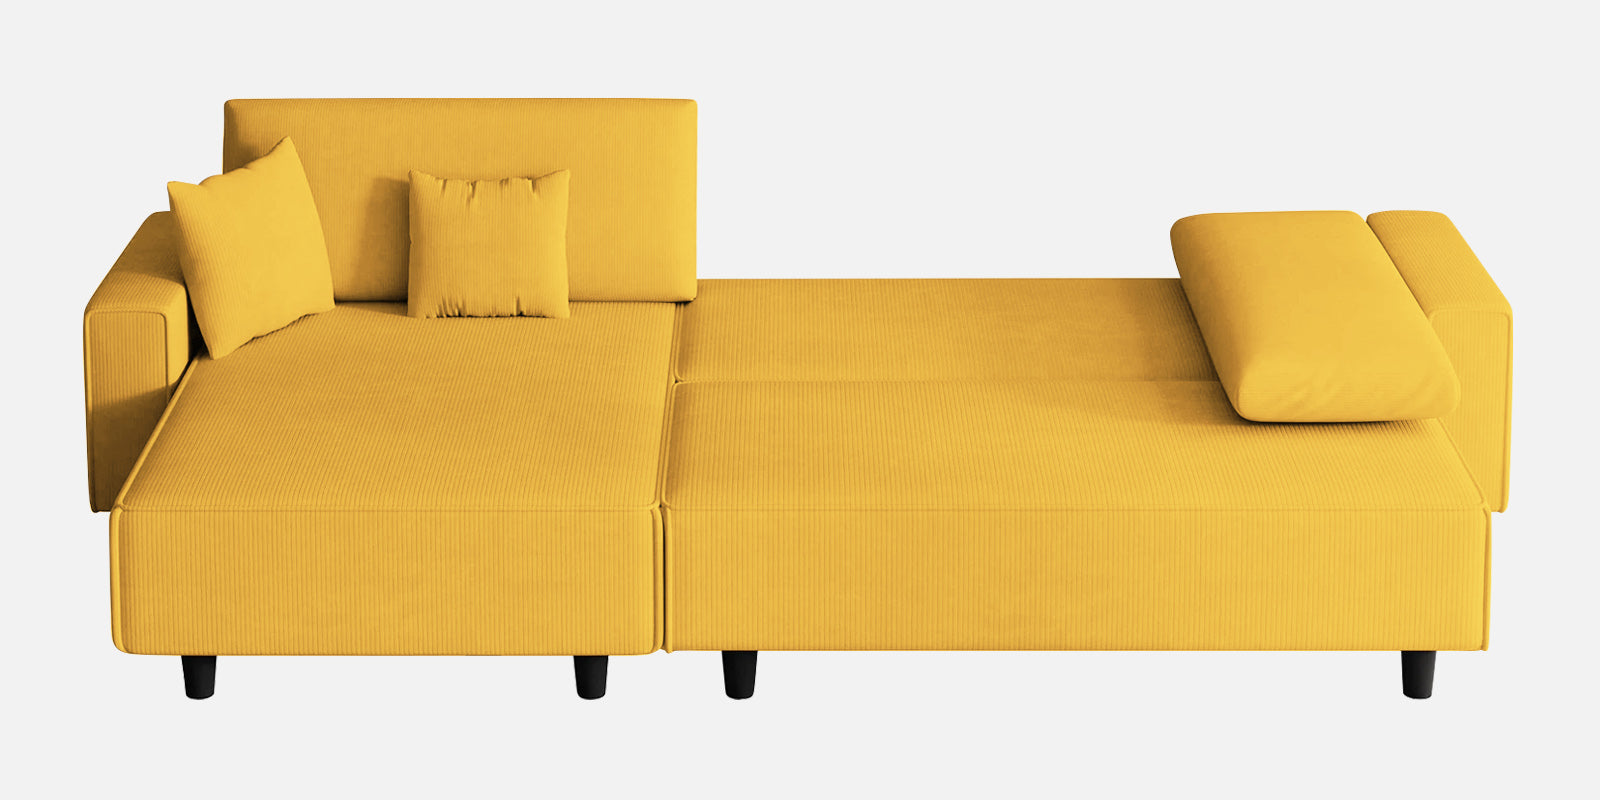 Peach Fabric RHS 6 Seater Sectional Sofa Cum Bed With Storage In Bold Yellow Colour